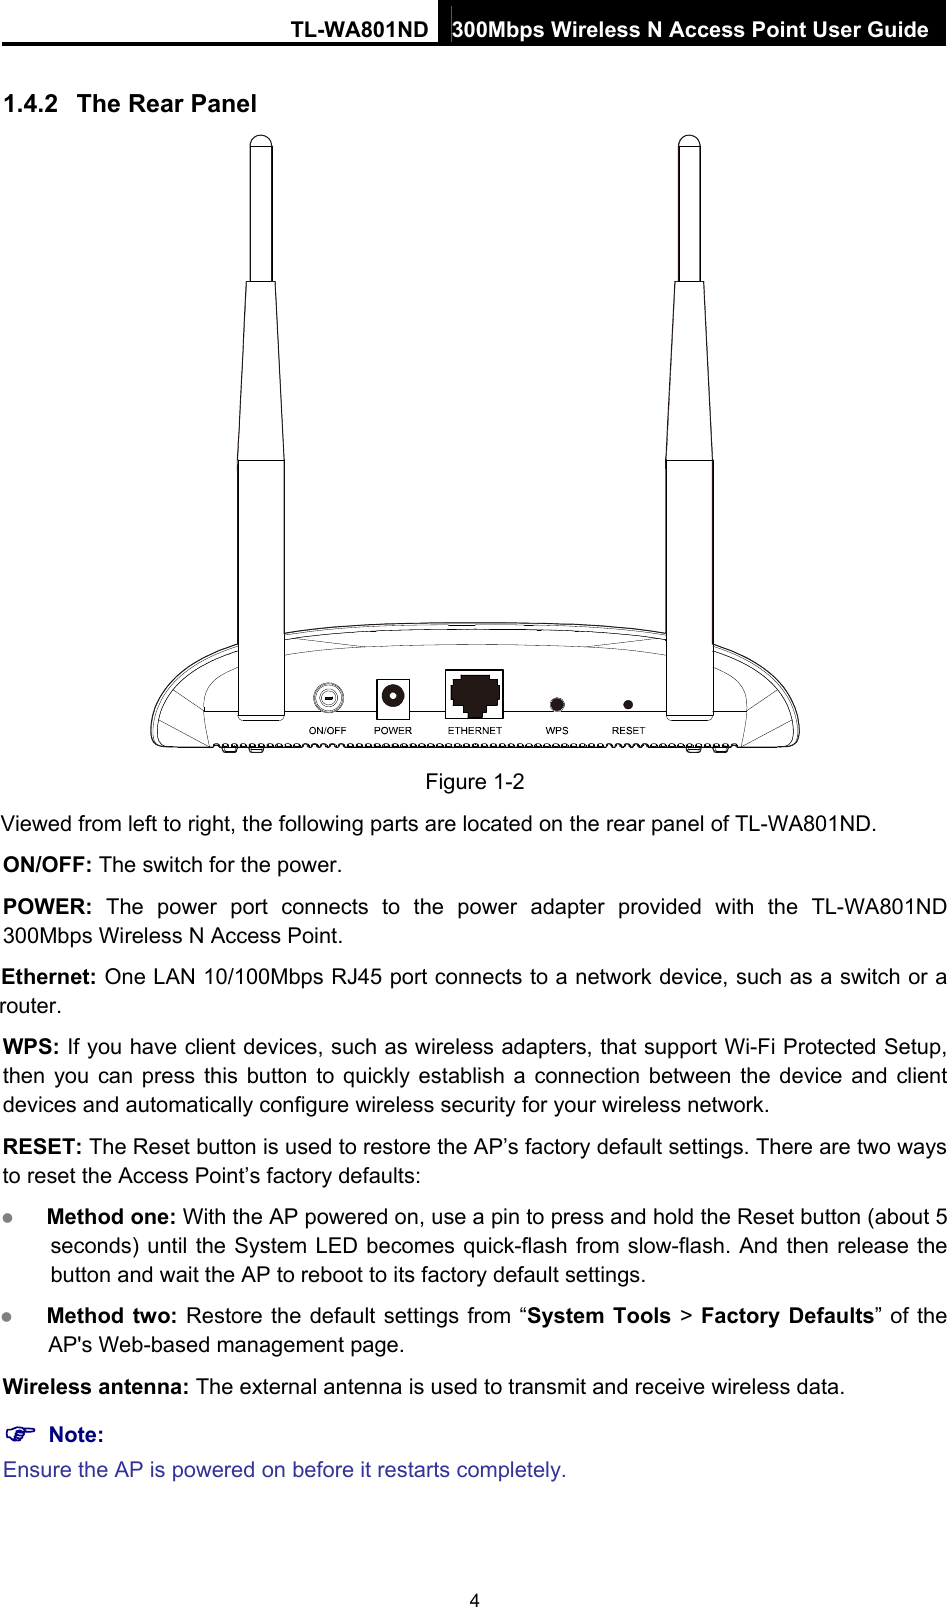 TL-WA801ND 300Mbps Wireless N Access Point User Guide 1.4.2  The Rear Panel  Figure 1-2 Viewed from left to right, the following parts are located on the rear panel of TL-WA801ND. ON/OFF: The switch for the power. POWER:  The power port connects to the power adapter provided with the TL-WA801ND 300Mbps Wireless N Access Point. Ethernet: One LAN 10/100Mbps RJ45 port connects to a network device, such as a switch or a router. WPS: If you have client devices, such as wireless adapters, that support Wi-Fi Protected Setup, then you can press this button to quickly establish a connection between the device and client devices and automatically configure wireless security for your wireless network.   RESET: The Reset button is used to restore the AP’s factory default settings. There are two ways to reset the Access Point’s factory defaults:    Method one: With the AP powered on, use a pin to press and hold the Reset button (about 5 seconds) until the System LED becomes quick-flash from slow-flash. And then release the button and wait the AP to reboot to its factory default settings.    Method two: Restore the default settings from “System Tools &gt; Factory Defaults” of the AP&apos;s Web-based management page. Wireless antenna: The external antenna is used to transmit and receive wireless data.  Note: Ensure the AP is powered on before it restarts completely. 4 